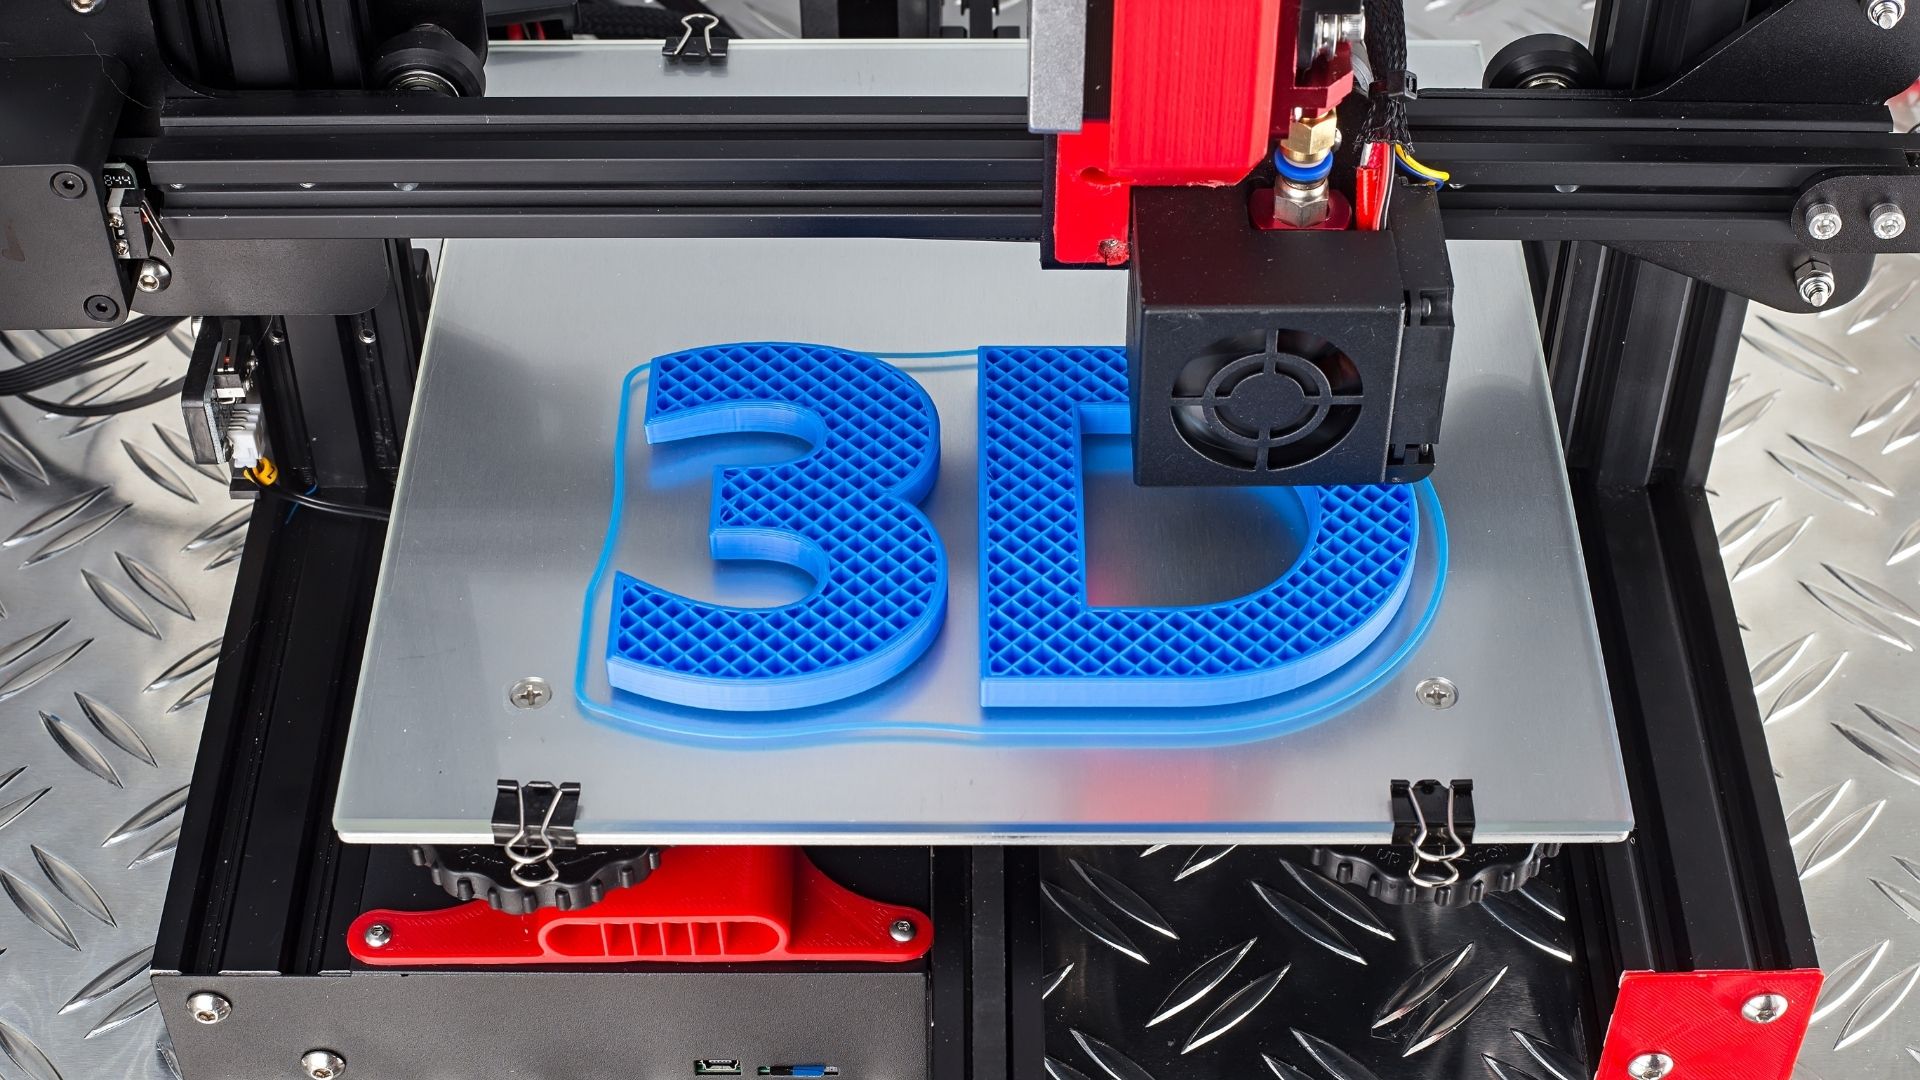 What Is the Best 3D Printing Speed and Temperature?